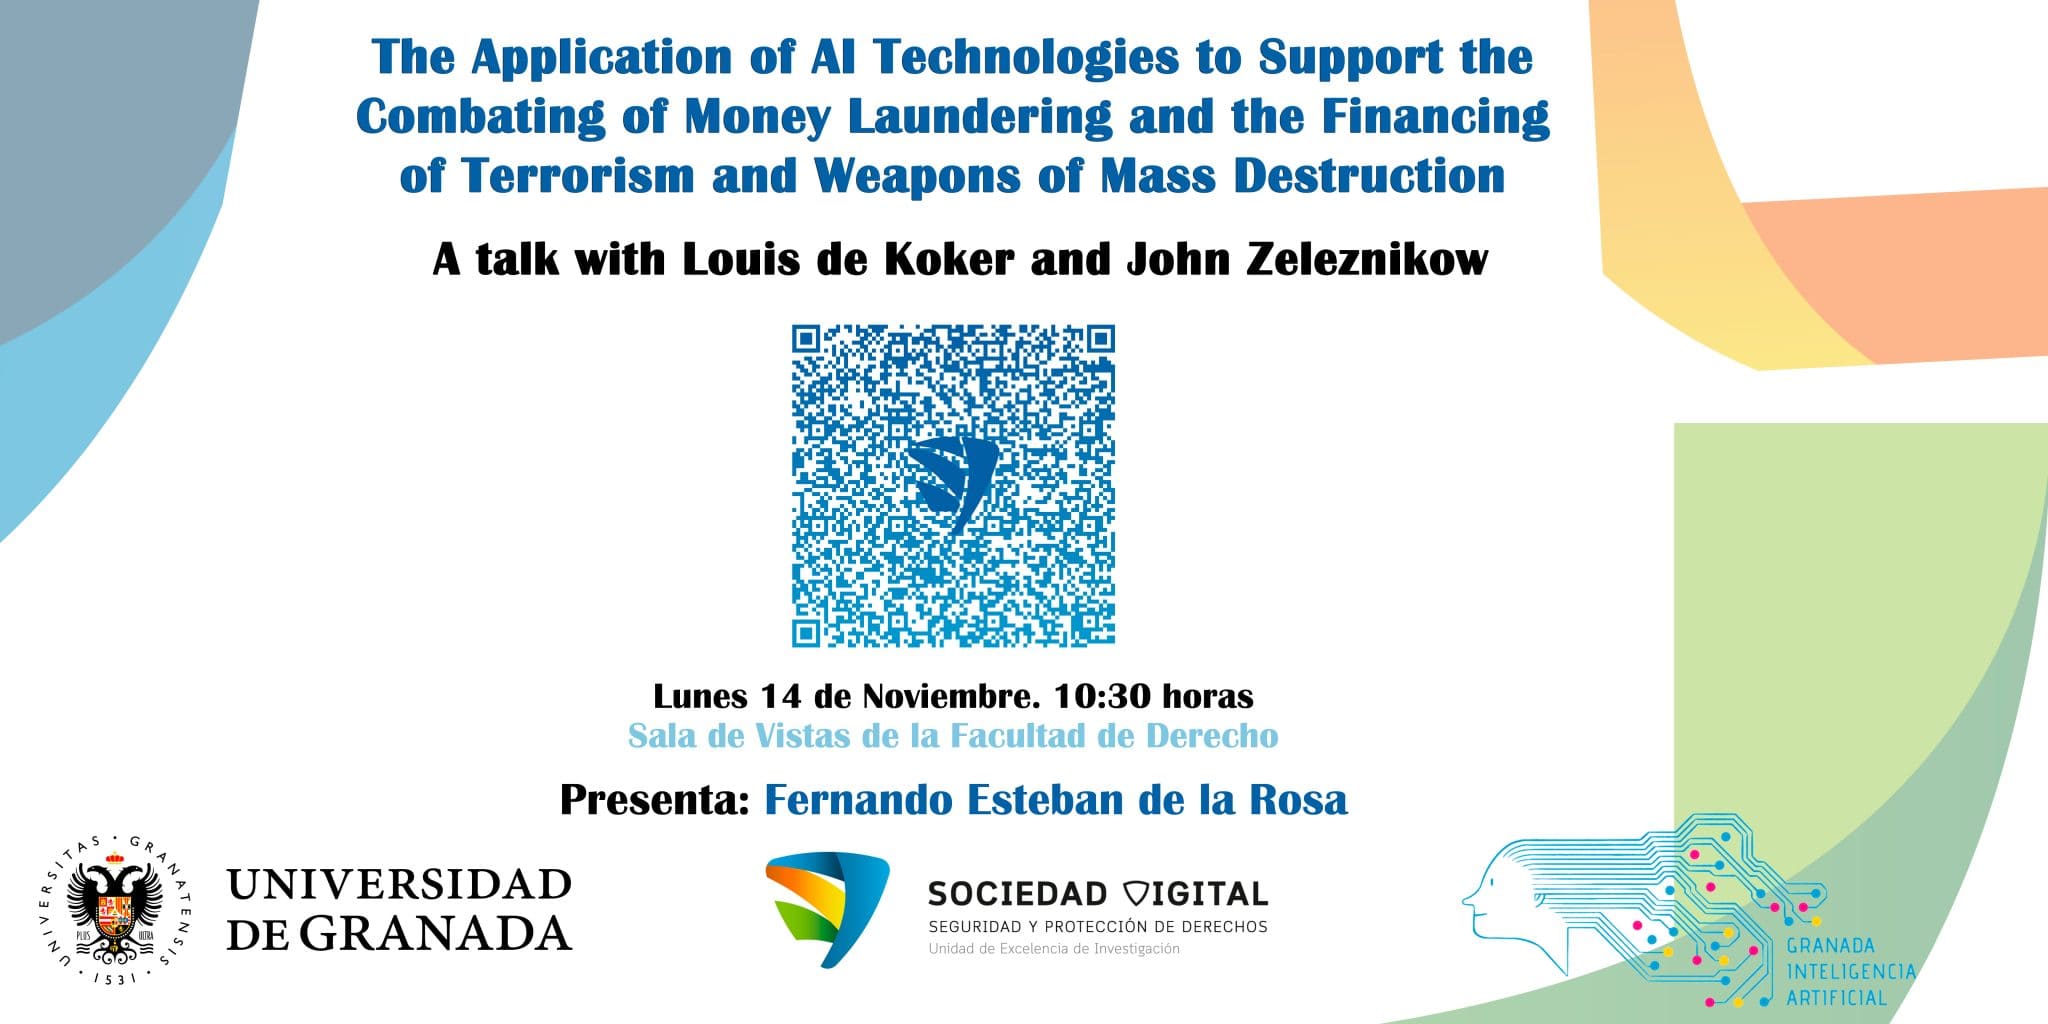 The Application of AI Technologies to Support the Combating of Money Laundering and the Financing of Terrorism and Weapons of Mass Destruction. A talk with Louis de Koker and John Zeleznikow